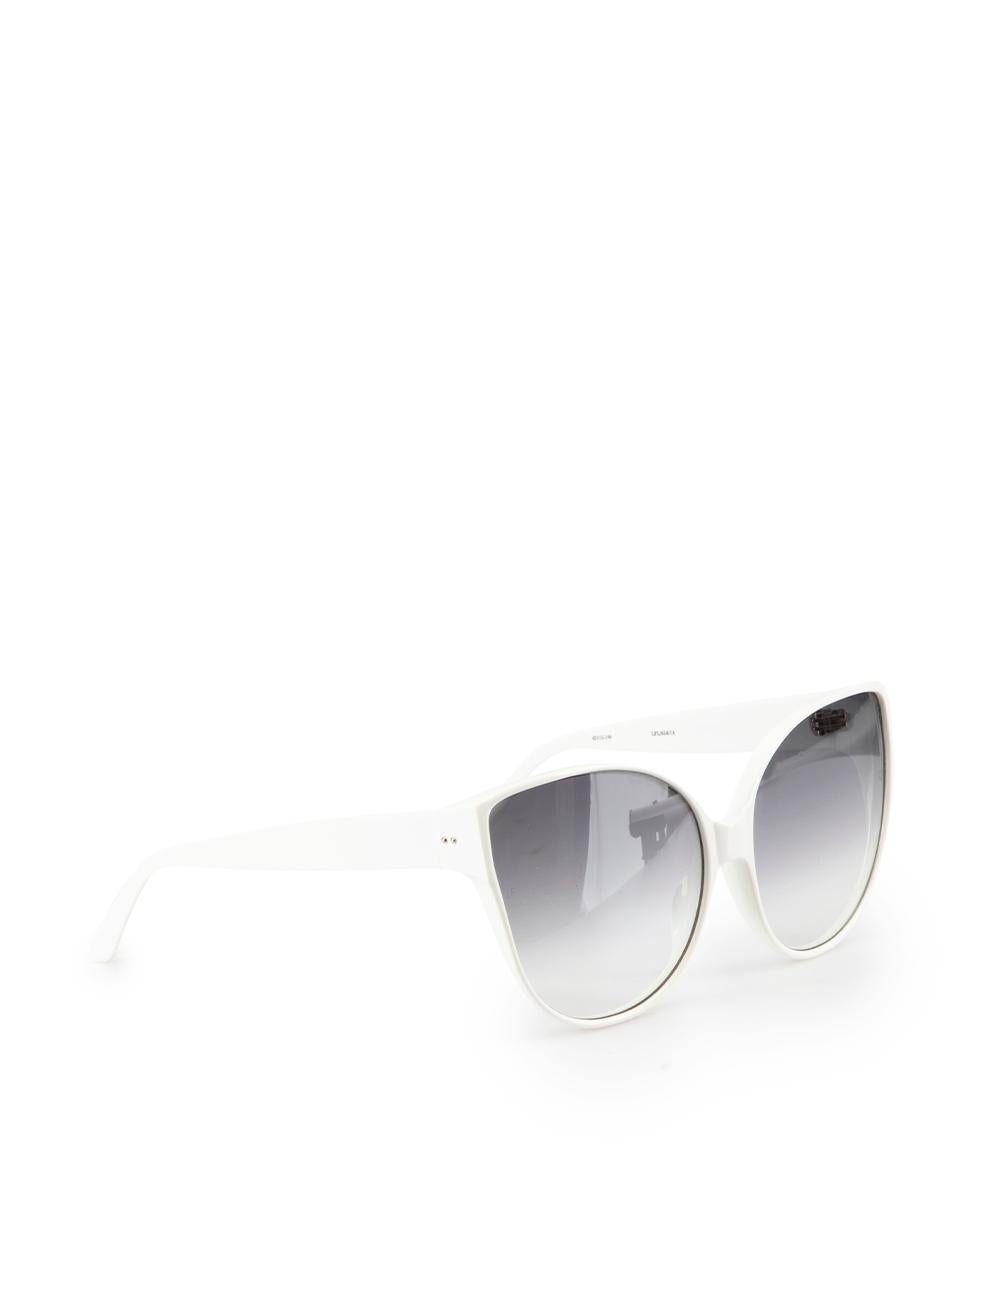 CONDITION is Very good. Hardly any visible wear to sunglasses is evident on this used Linda Farrow designer resale item. These sunglasses come with original case.

Details
White
Plastic
Oversized cat eye sunglasses
Gradient tinted grey